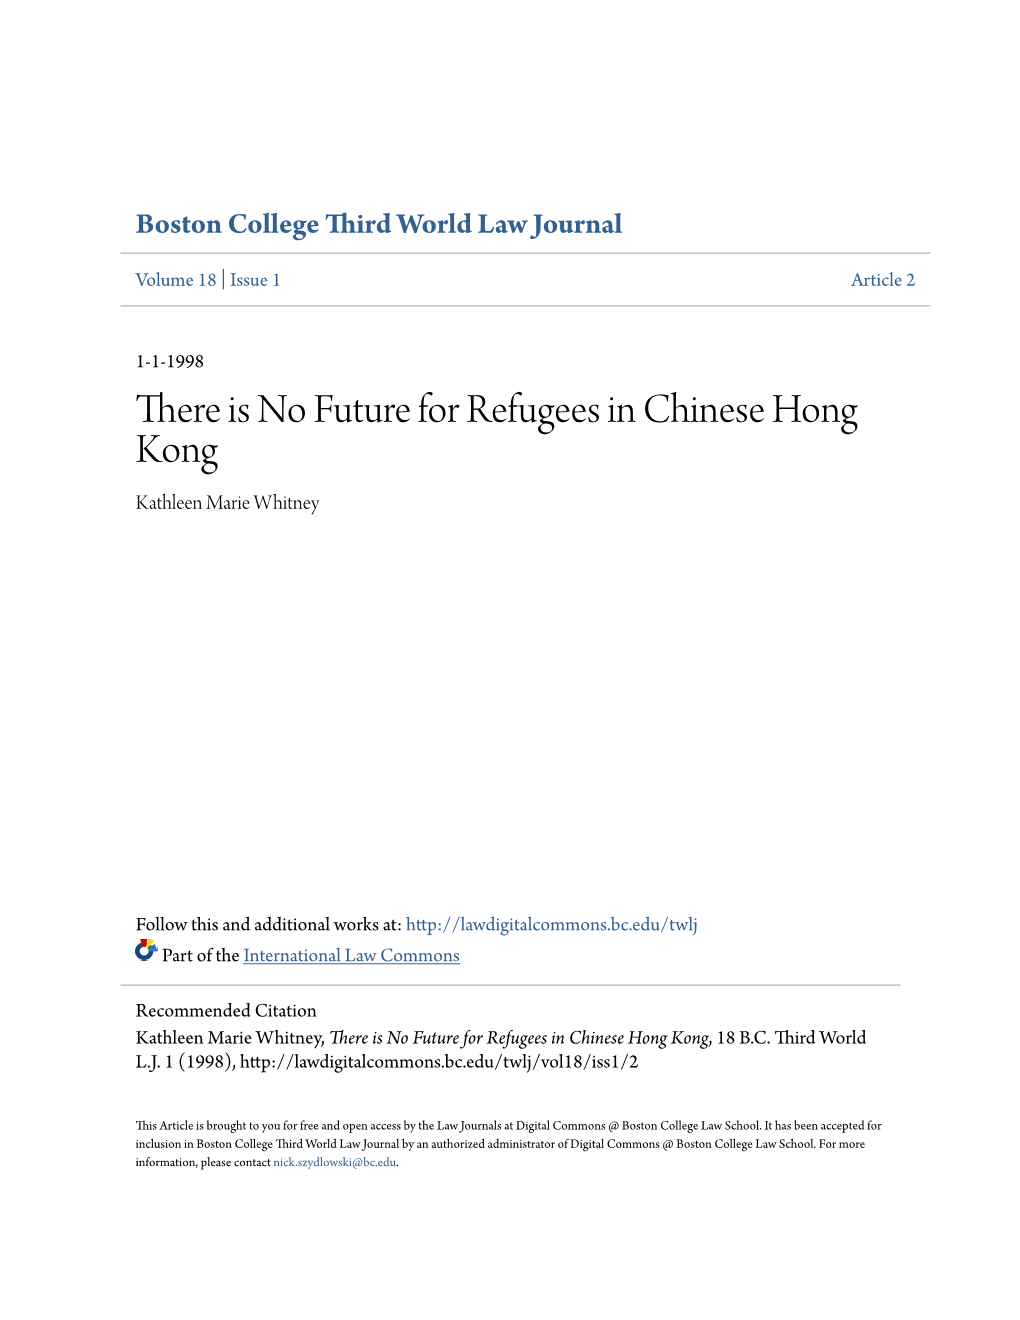 There Is No Future for Refugees in Chinese Hong Kong Kathleen Marie Whitney